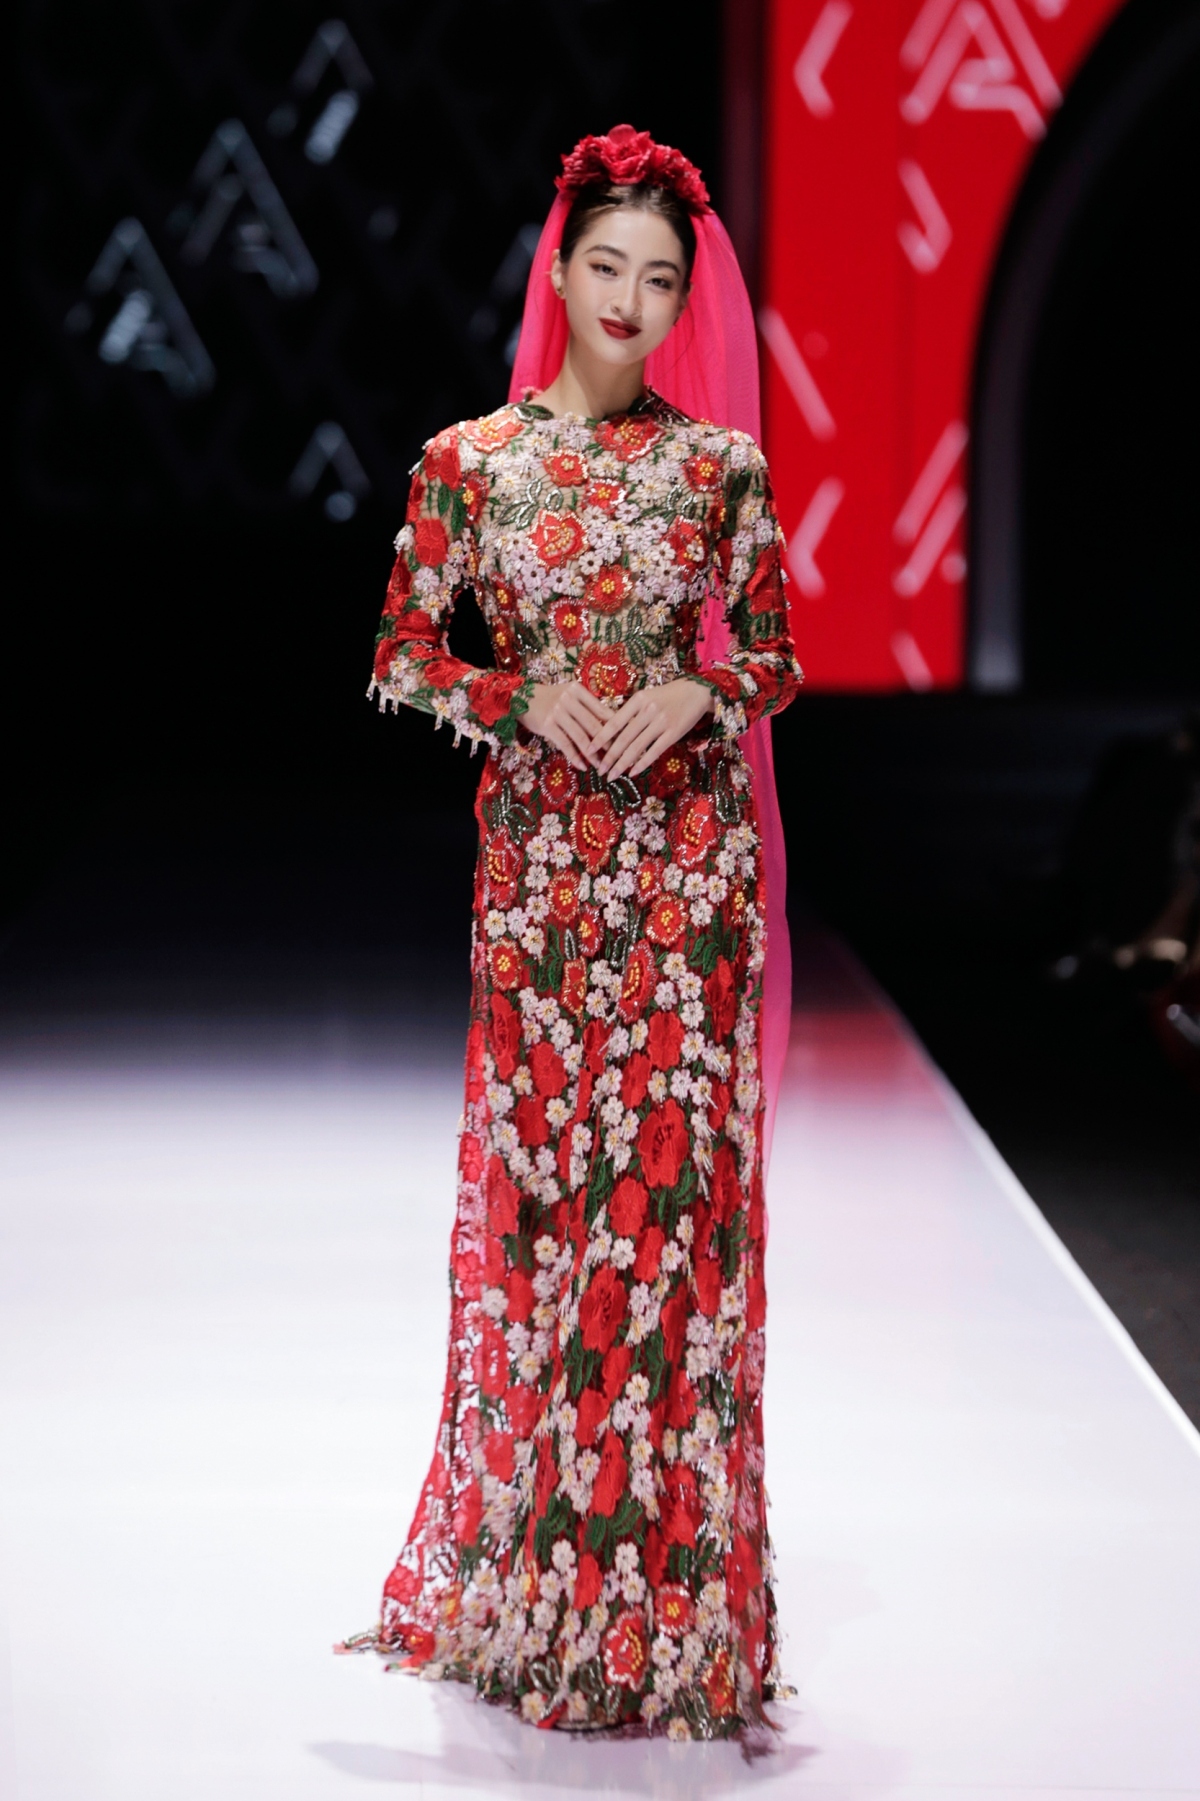 Adrian Anh Tuan, one of the country’s top designers, debuts his latest collection during the course of the fashion week.